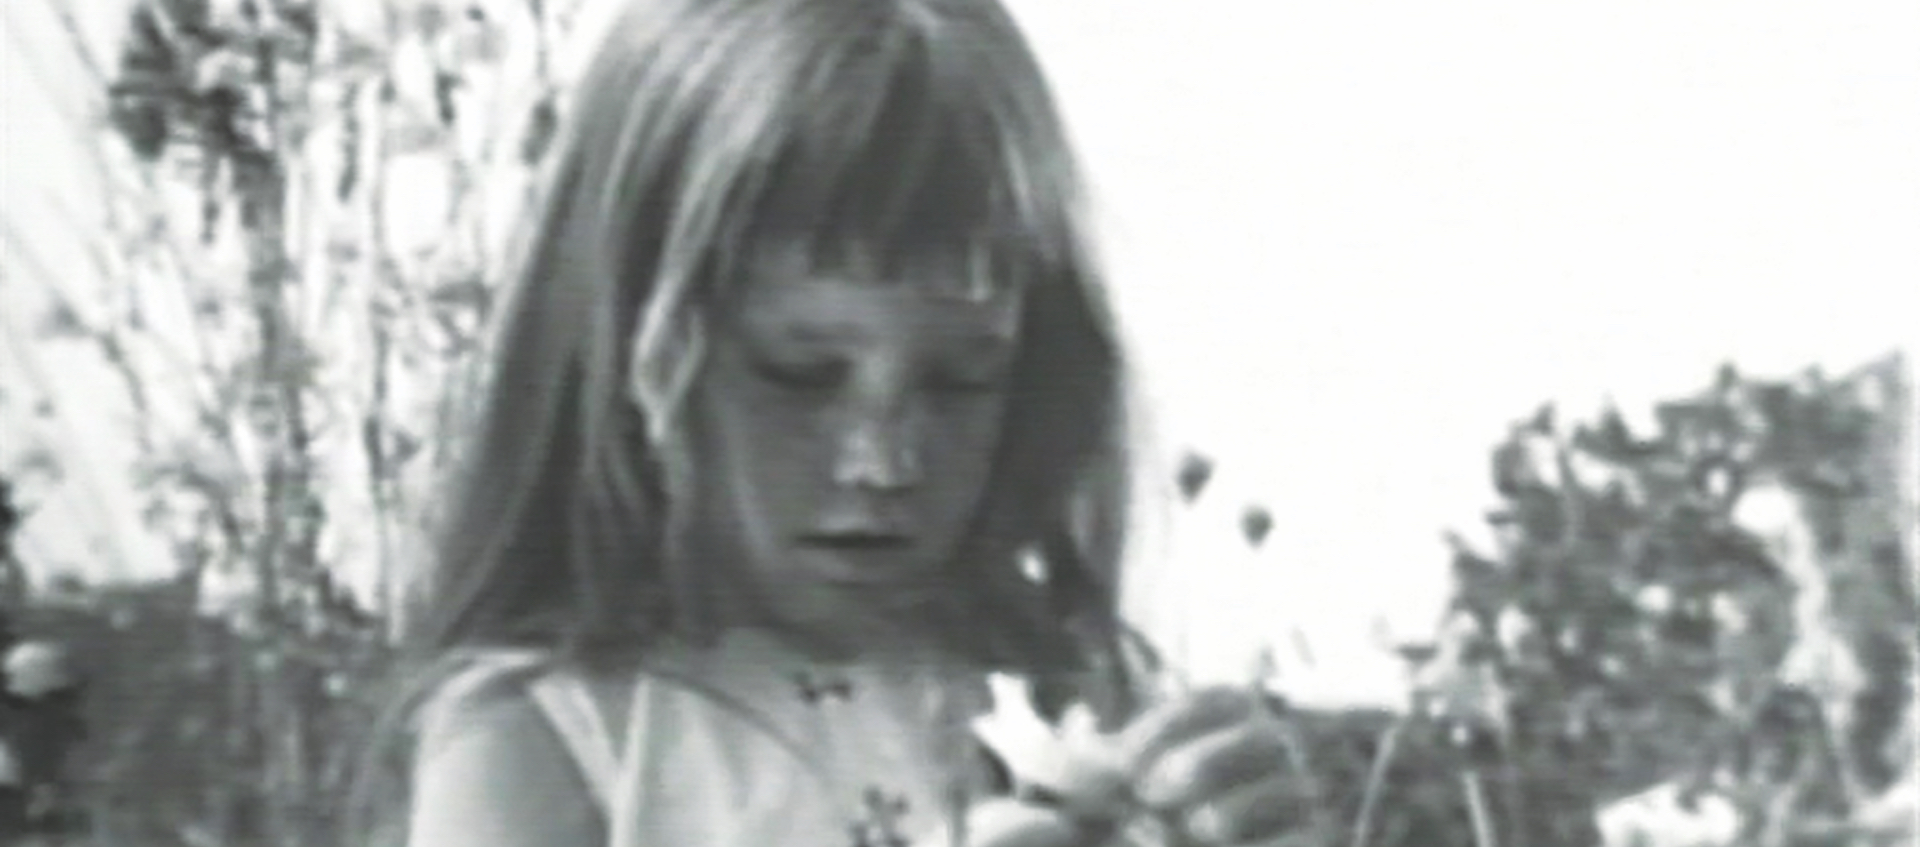 black and white image of a little girl picking the petals off a daisy, from a historic Lyndon Johnson campaign ad